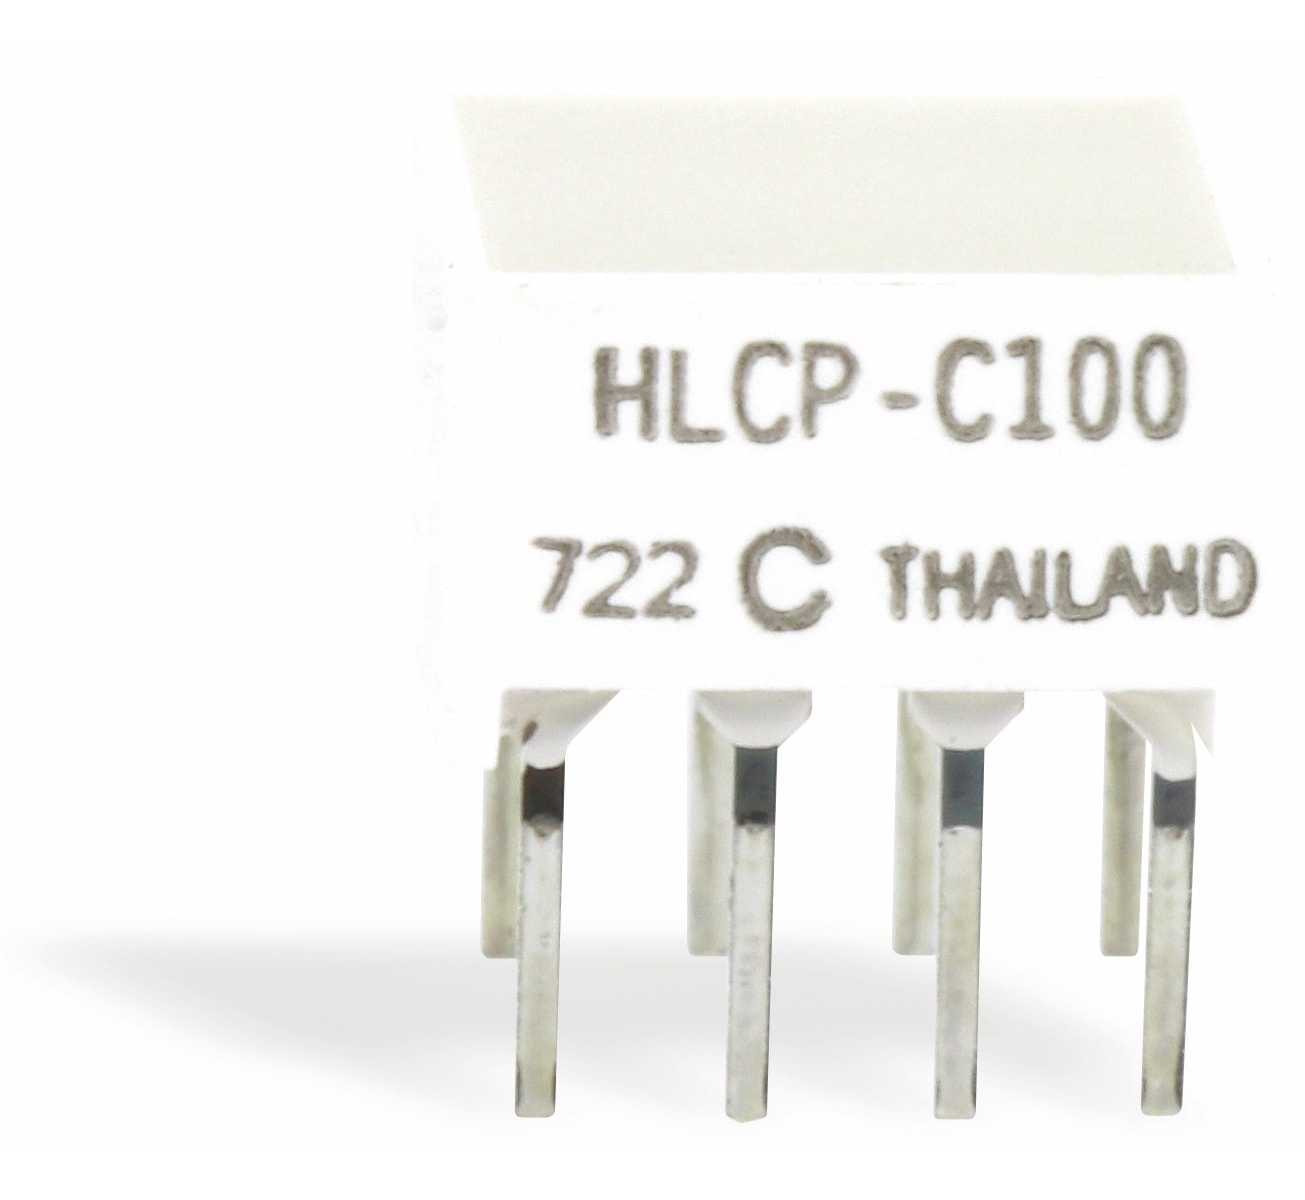 Flächen-LED HLCP-C100, 8,89x8,89 mm, rot